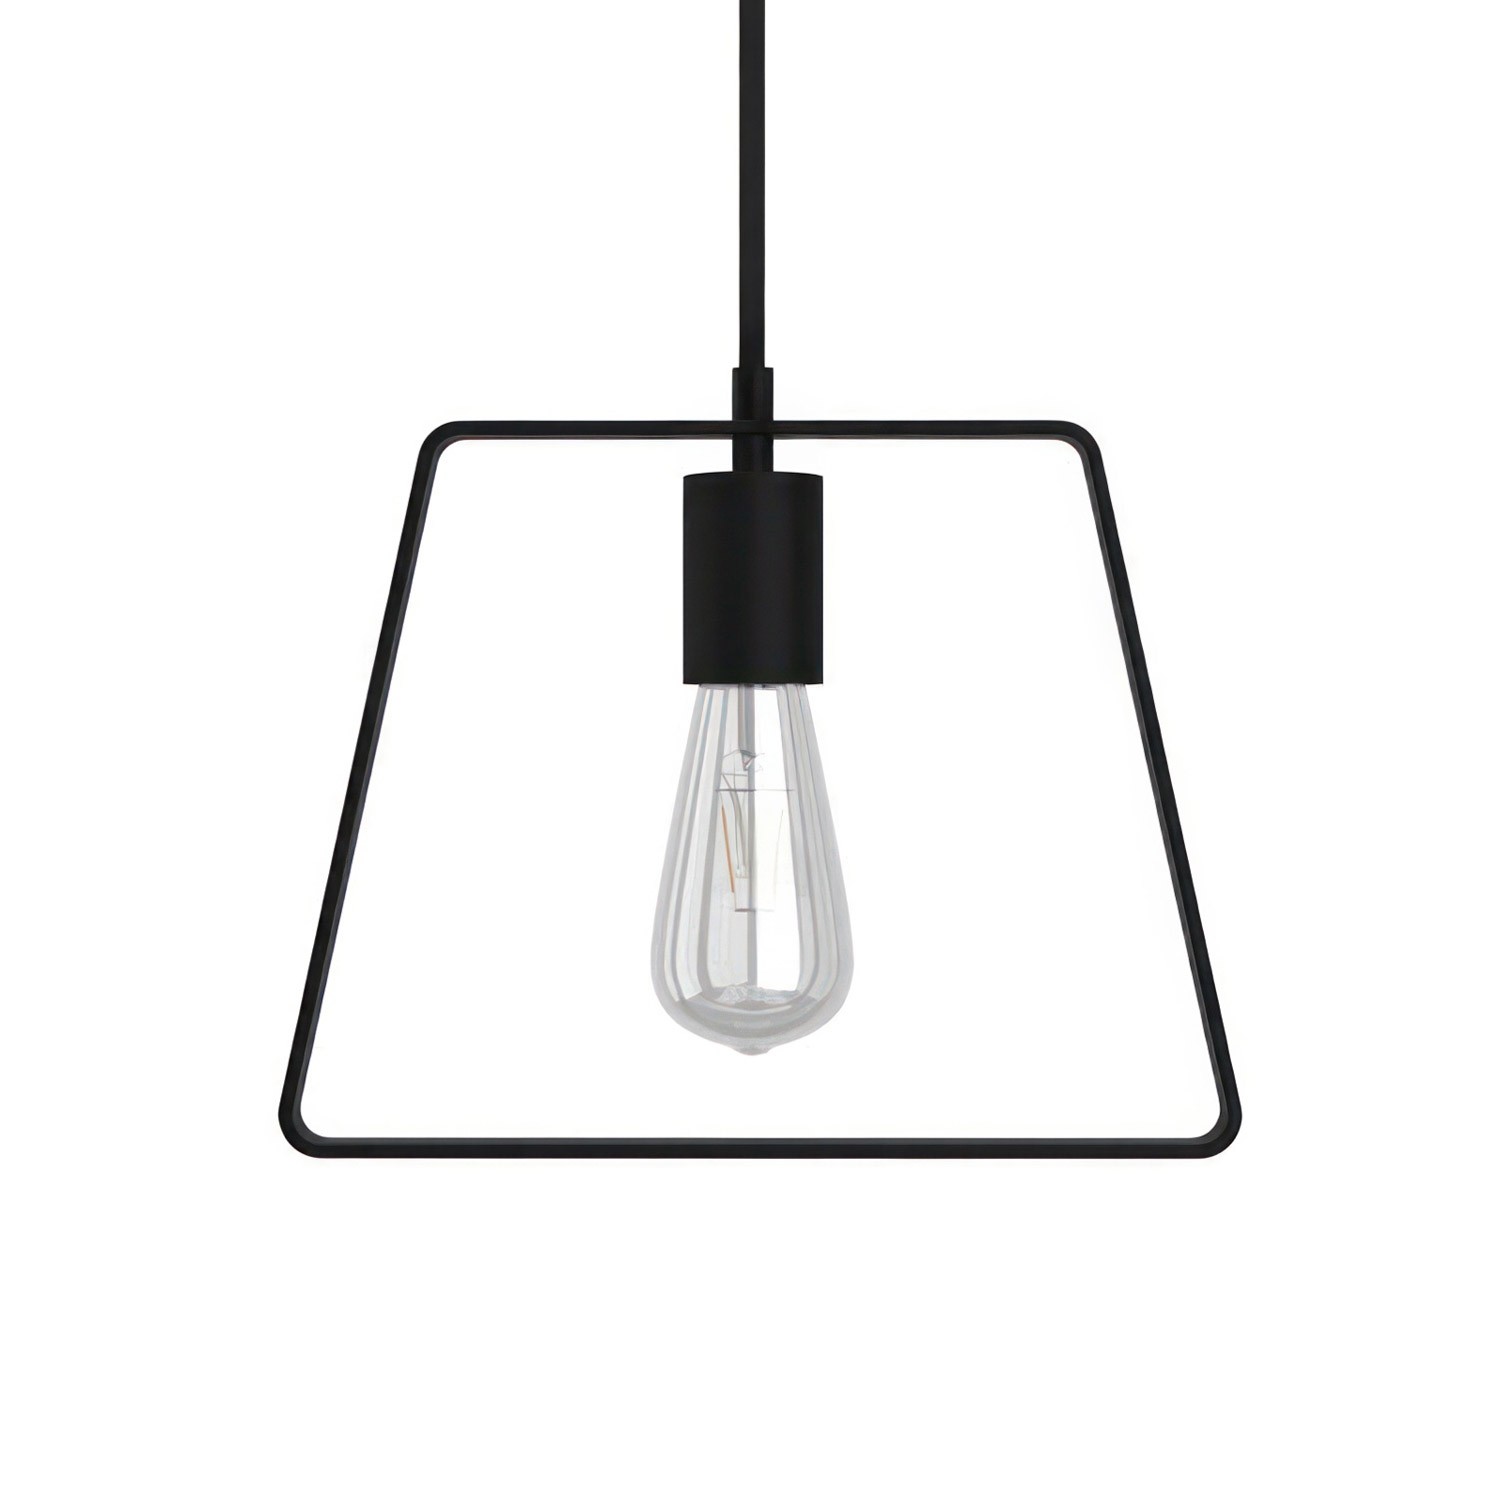 Pendant lamp with textile cable, Duedì Base lampshade and metal details - Made in Italy - Bulb included